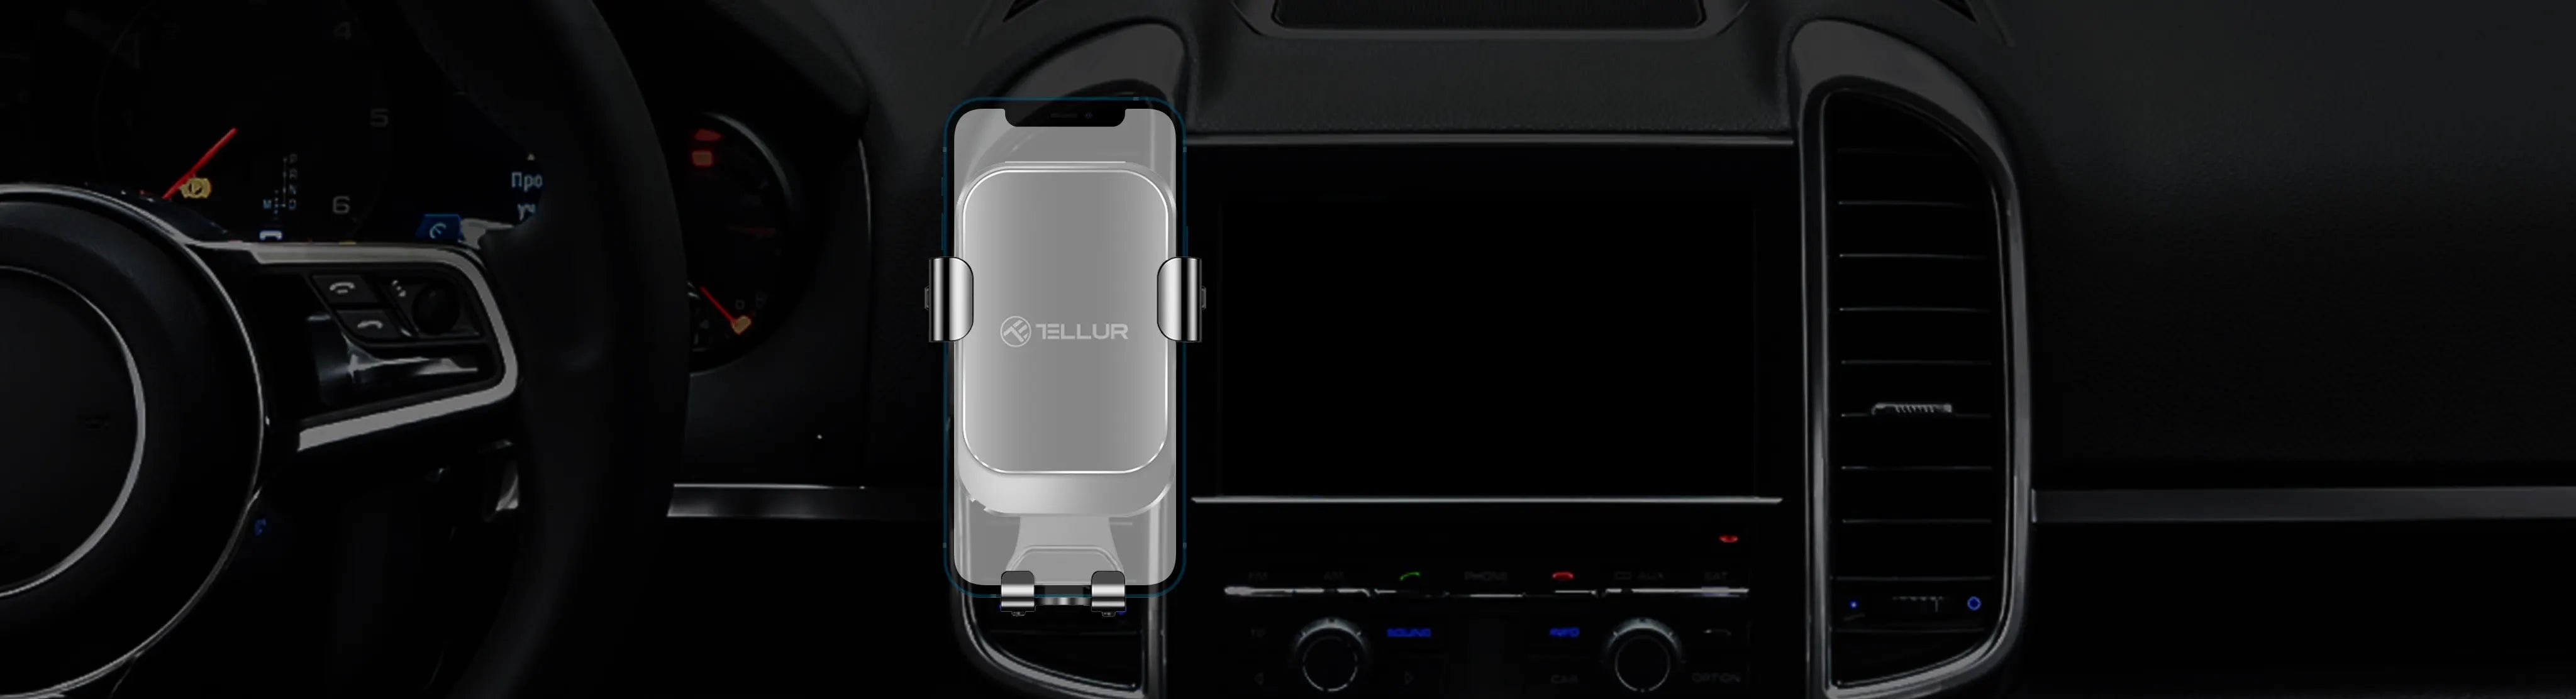 Tellur's sturdy magnetic car vent holder, designed for optimal phone stability and easy access, enhancing your in-car experience